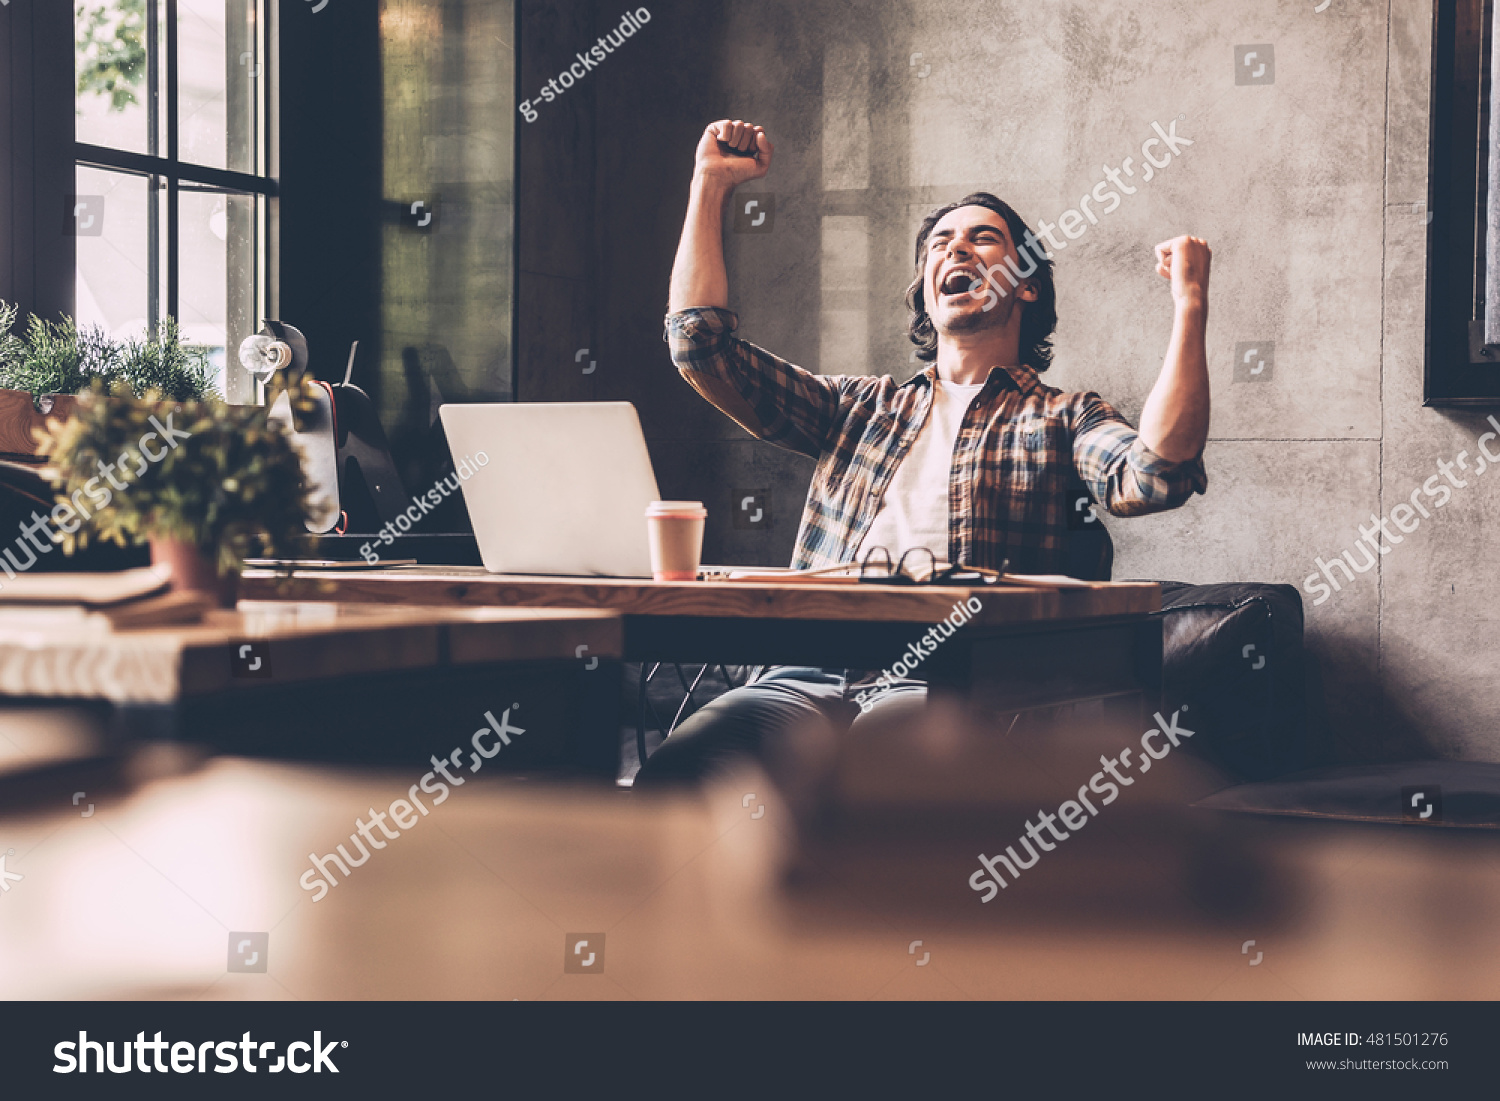 Everyday winner. Cheerful young man in casual wear keeping arms raised and looking happy while sitting at the desk in office  #481501276